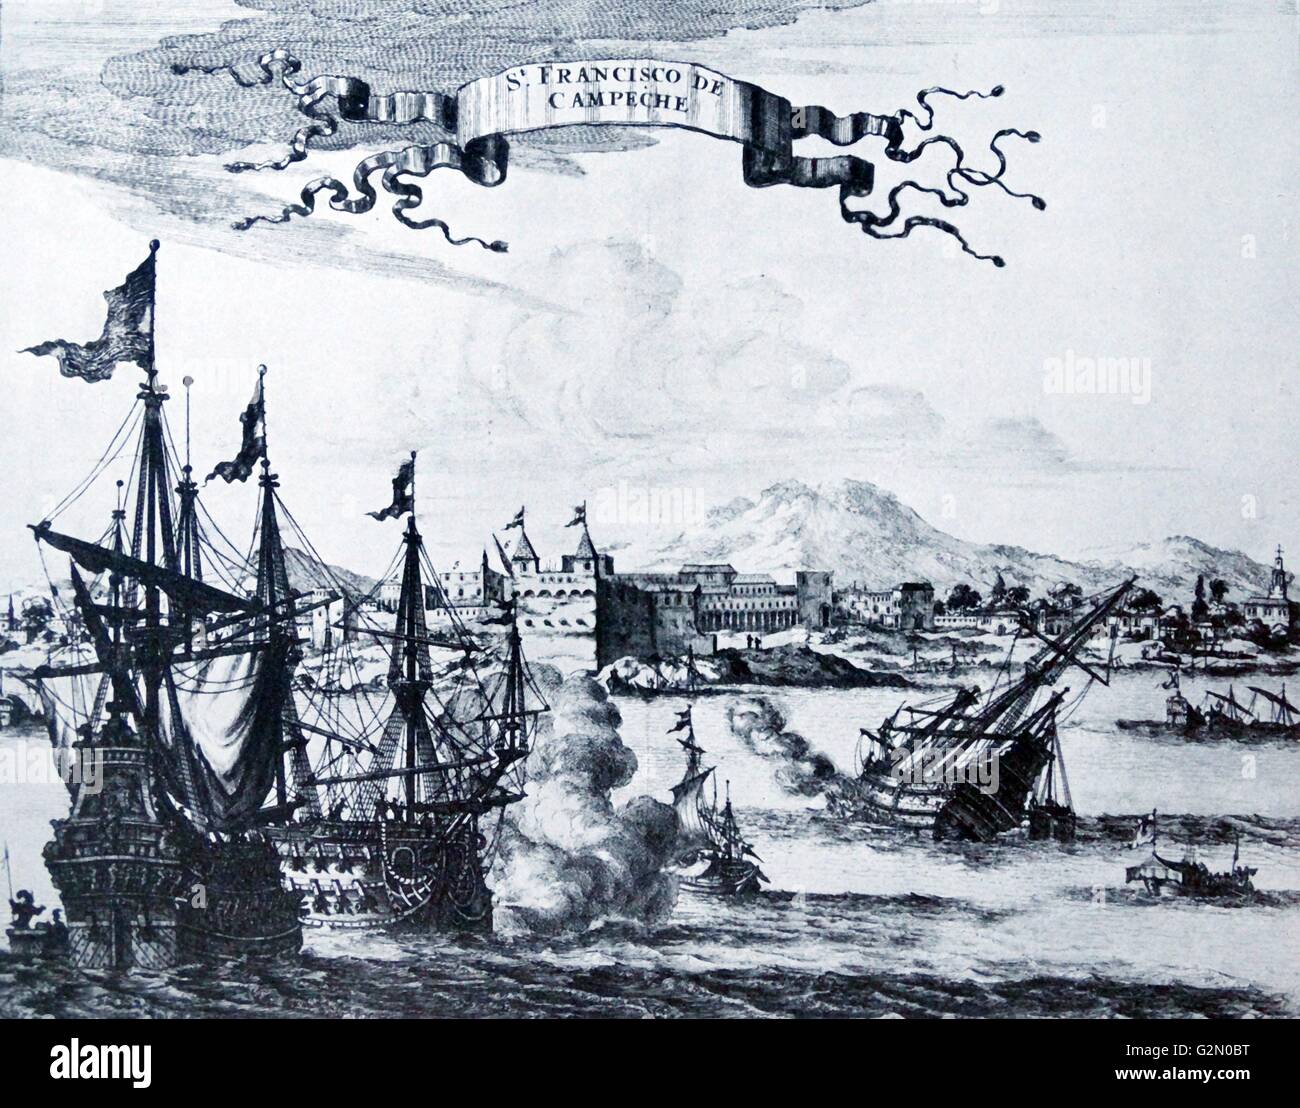 Large view of St. Francisco de Campeche in the Yucatan, Mexico. numerous warships are fighting in the foreground and firing on the fort. Title ribbon in the sky. This map is taken from Ogilby's An Accurate Description and Complete History of America based on De Nieuwe en Onbekende Wereld by Arnold Montanus. The plates were prepared by Jacob Van Meurs of Amsterdam. 1671 Stock Photo